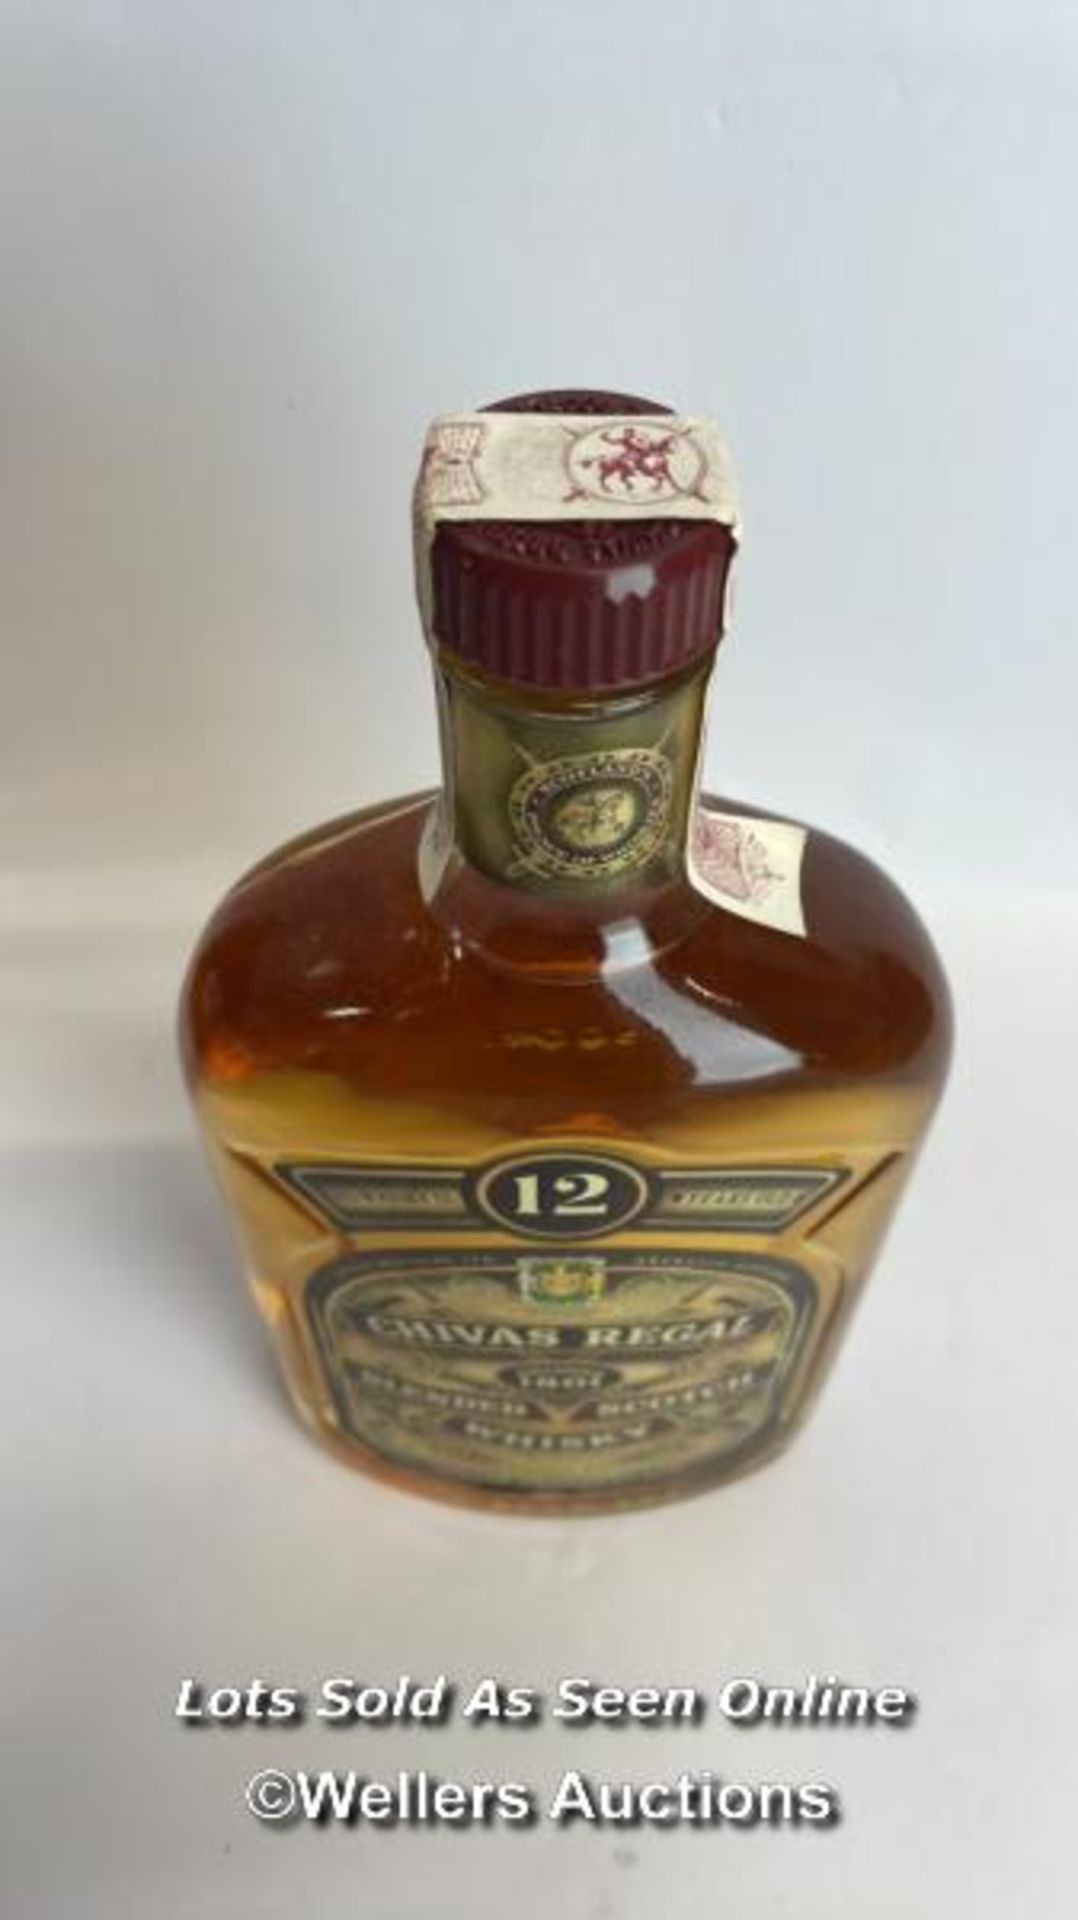 Chivas Regal Blended Scotch Whisky, Aged 12 Years, 50cl, 43% vol, In original box / Please see - Image 6 of 6